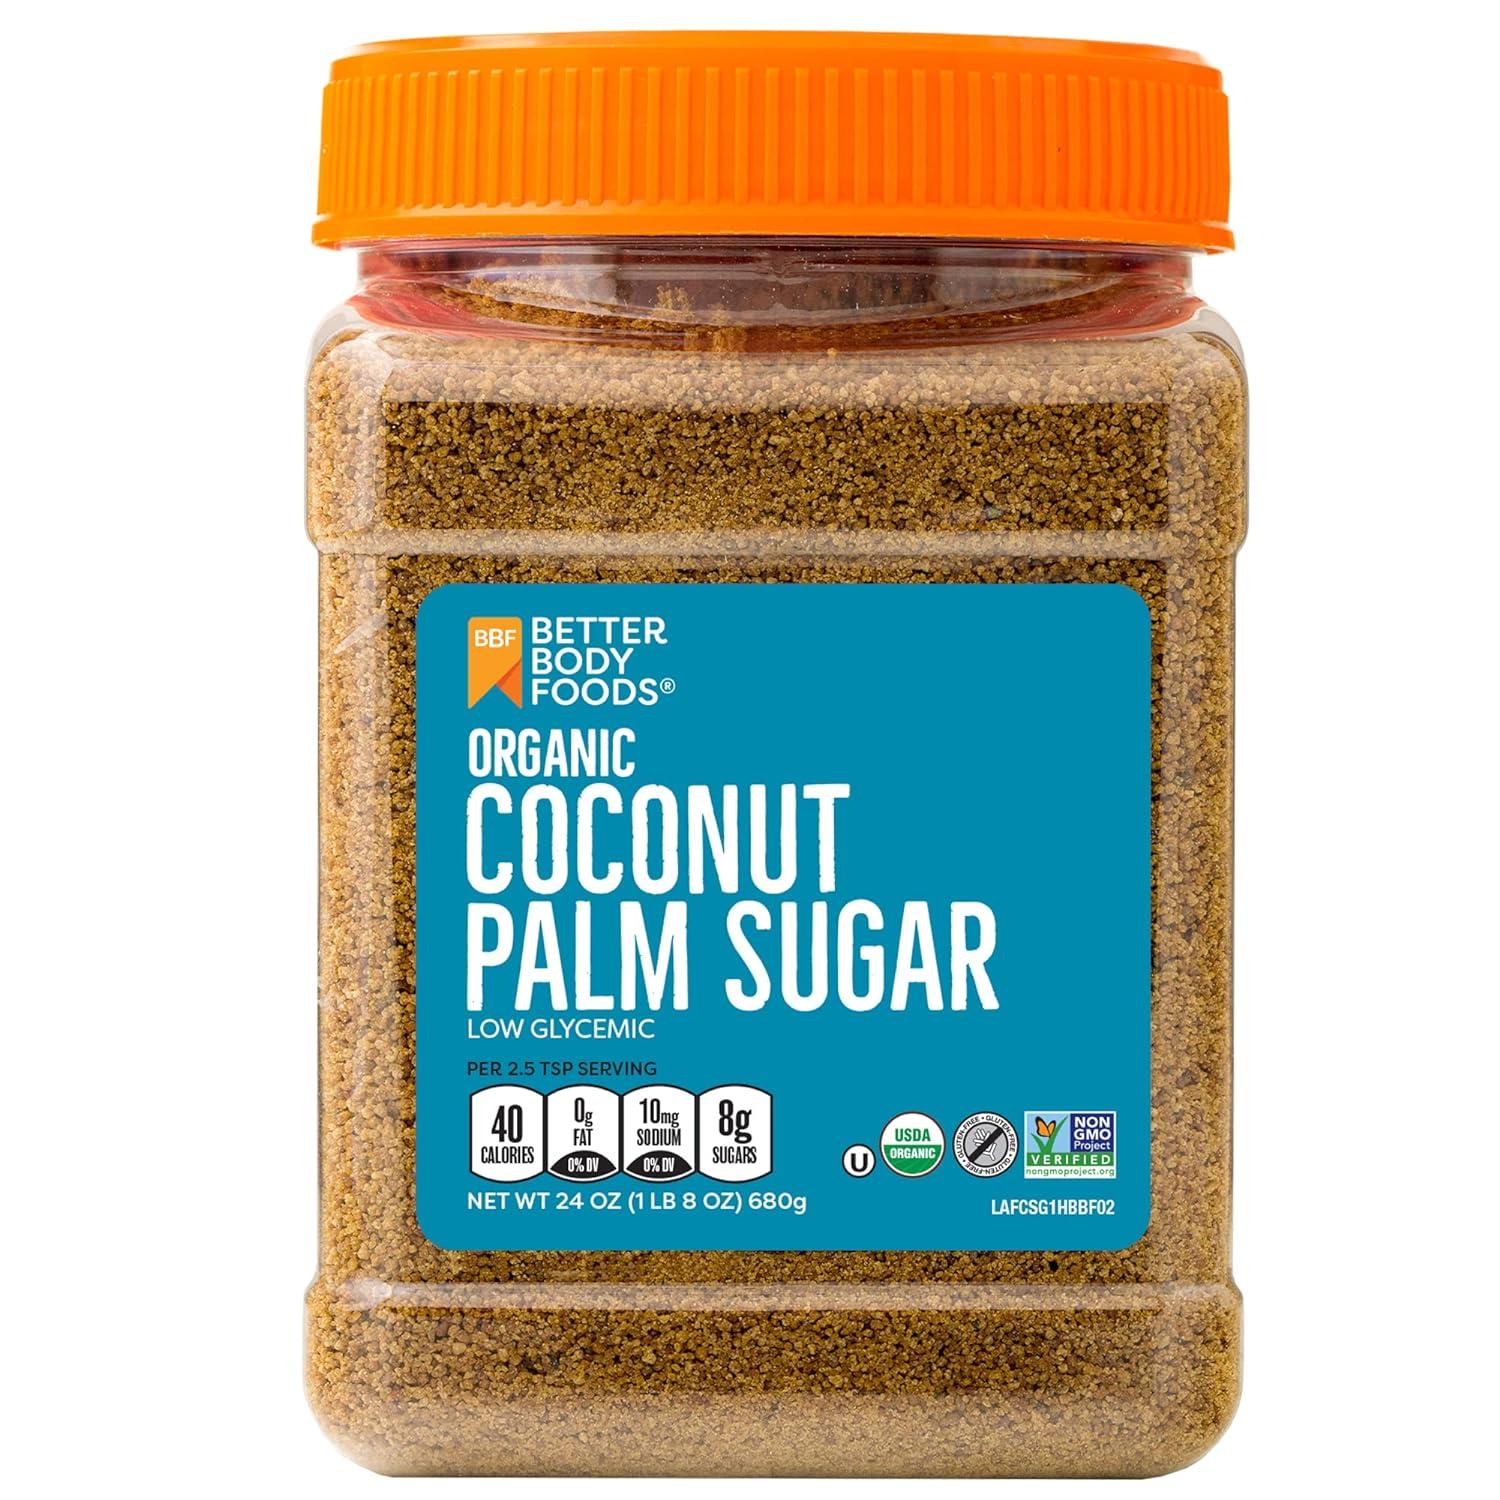 BetterBody Foods Organic Coconut Palm Sugar with $1 Credit for $5.58